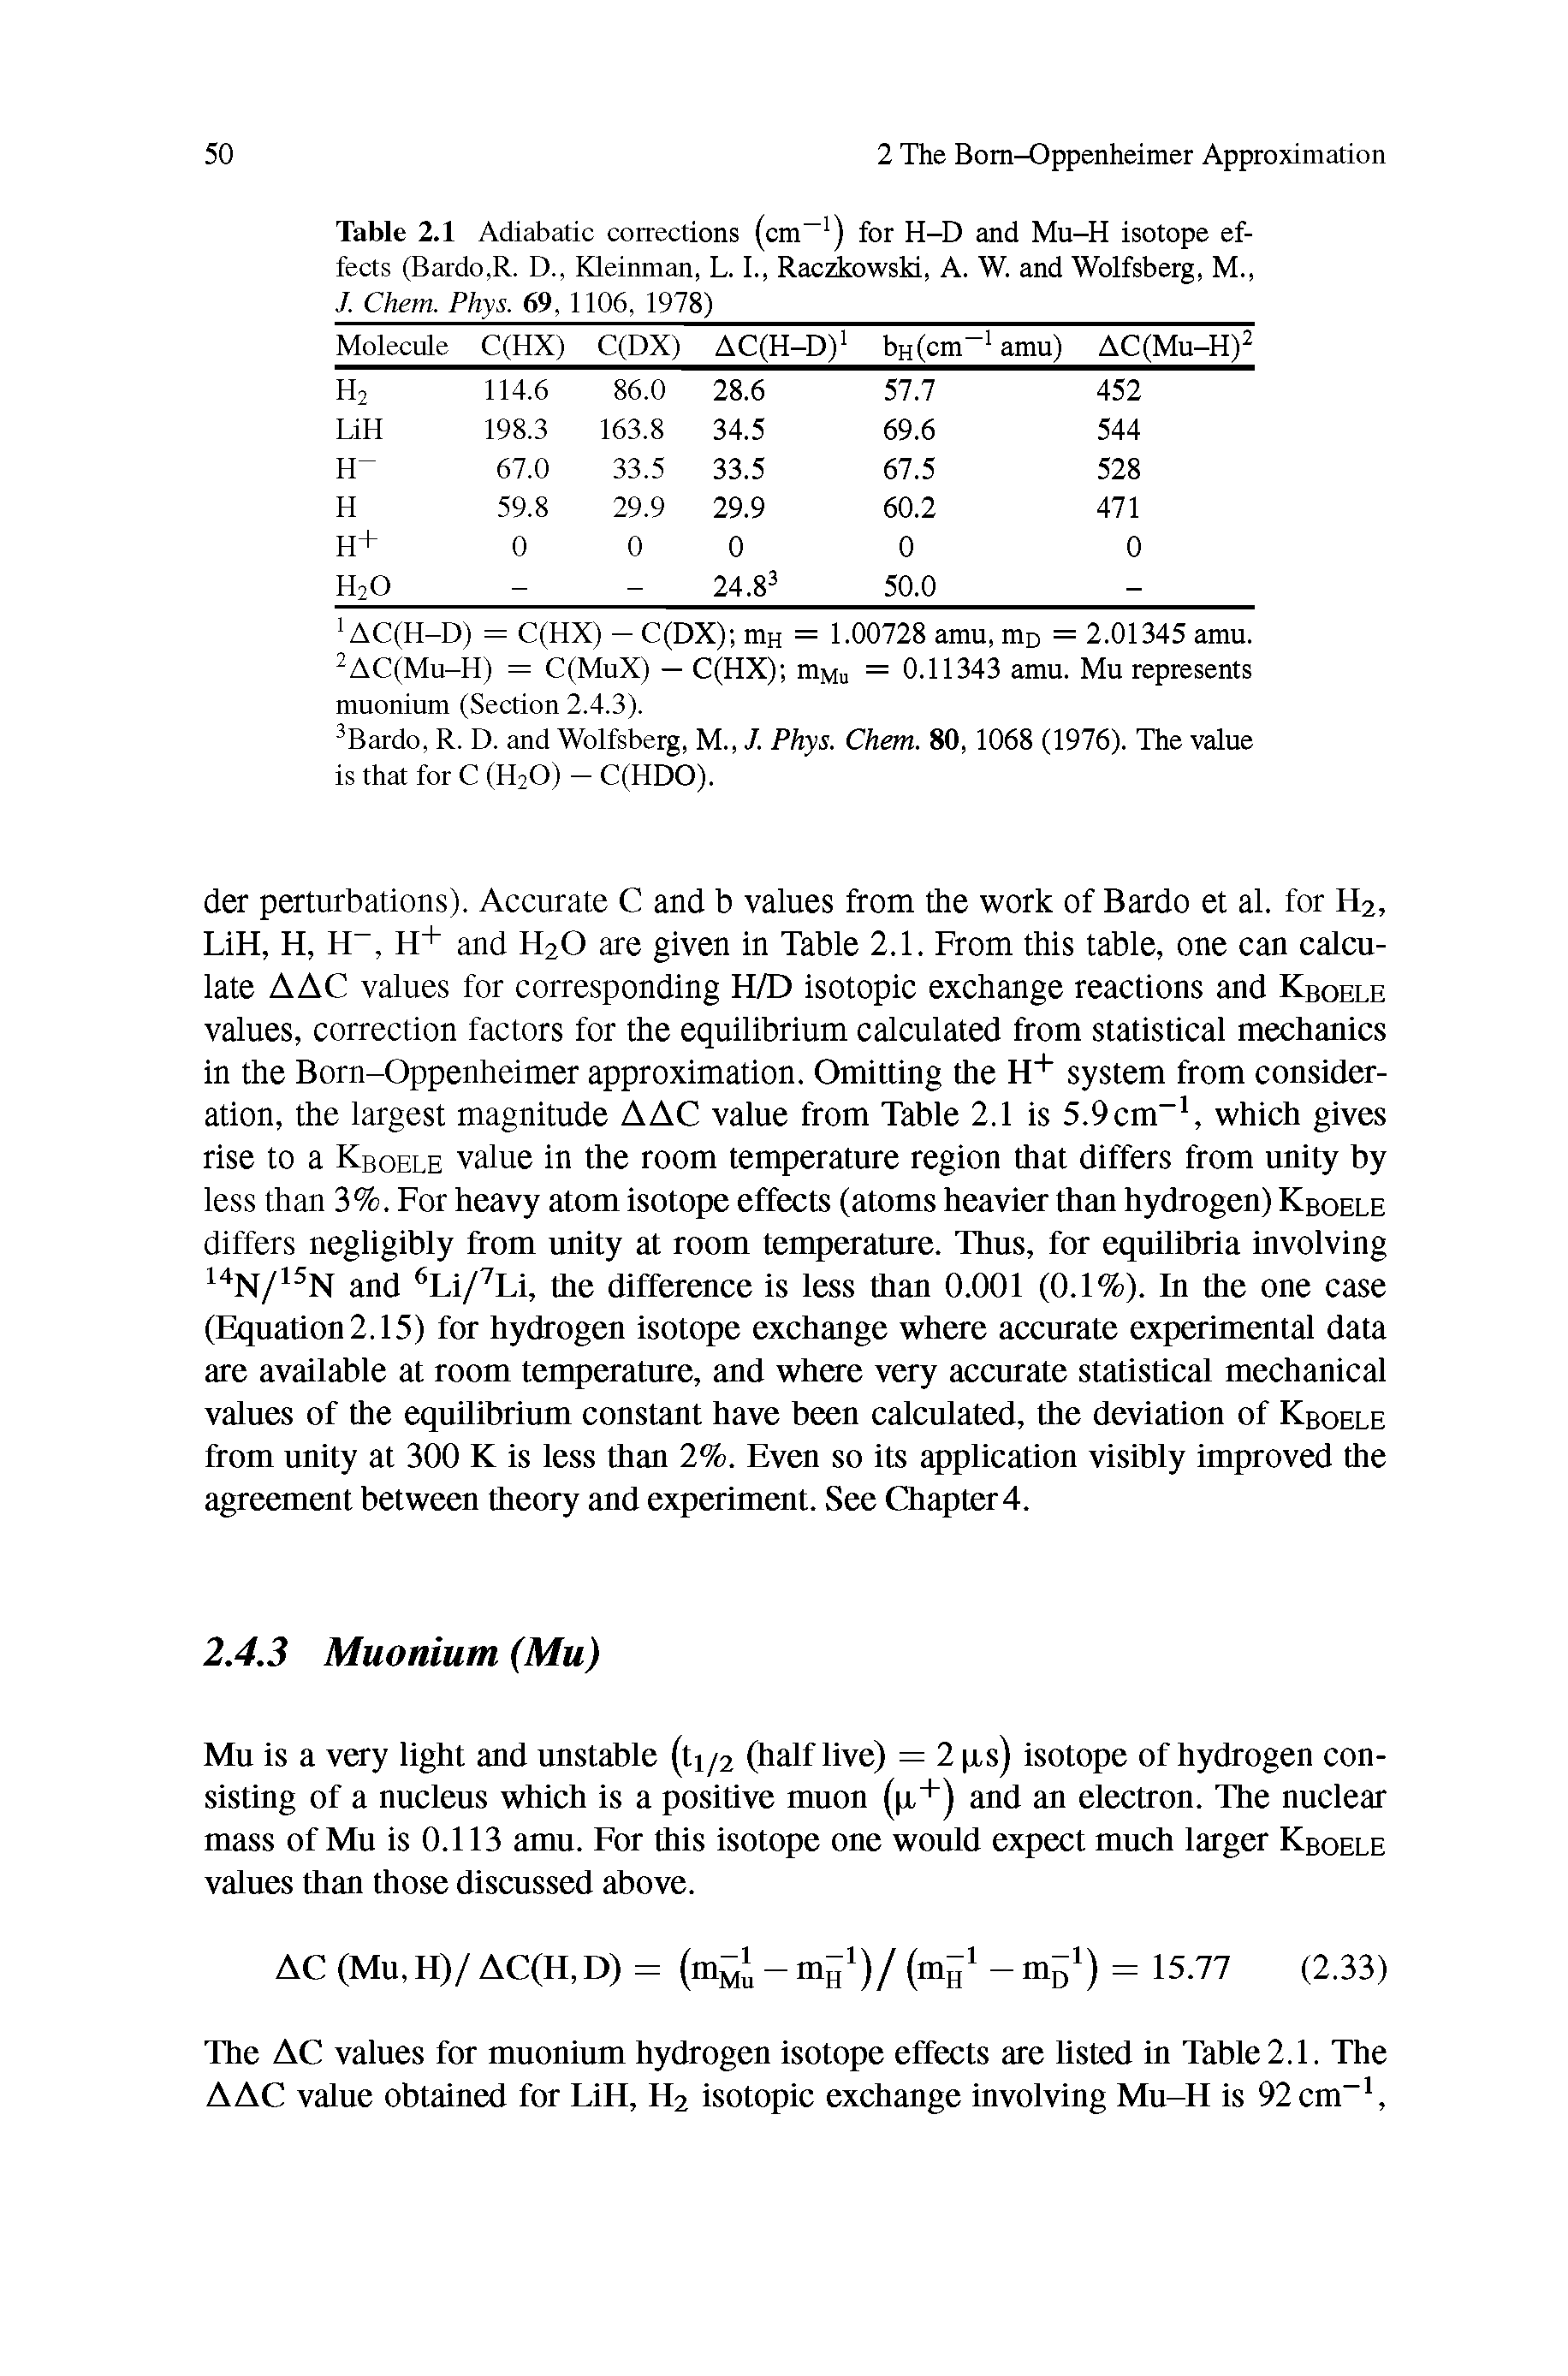 Table 2.1 Adiabatic corrections (cm ) for H-D and Mu-H isotope effects (Bardo,R. D., Kleinman, L. I., Raczkowski, A. W. and Wolfsberg, M., J. Chem. Phys. 69, 1106, 1978) ...